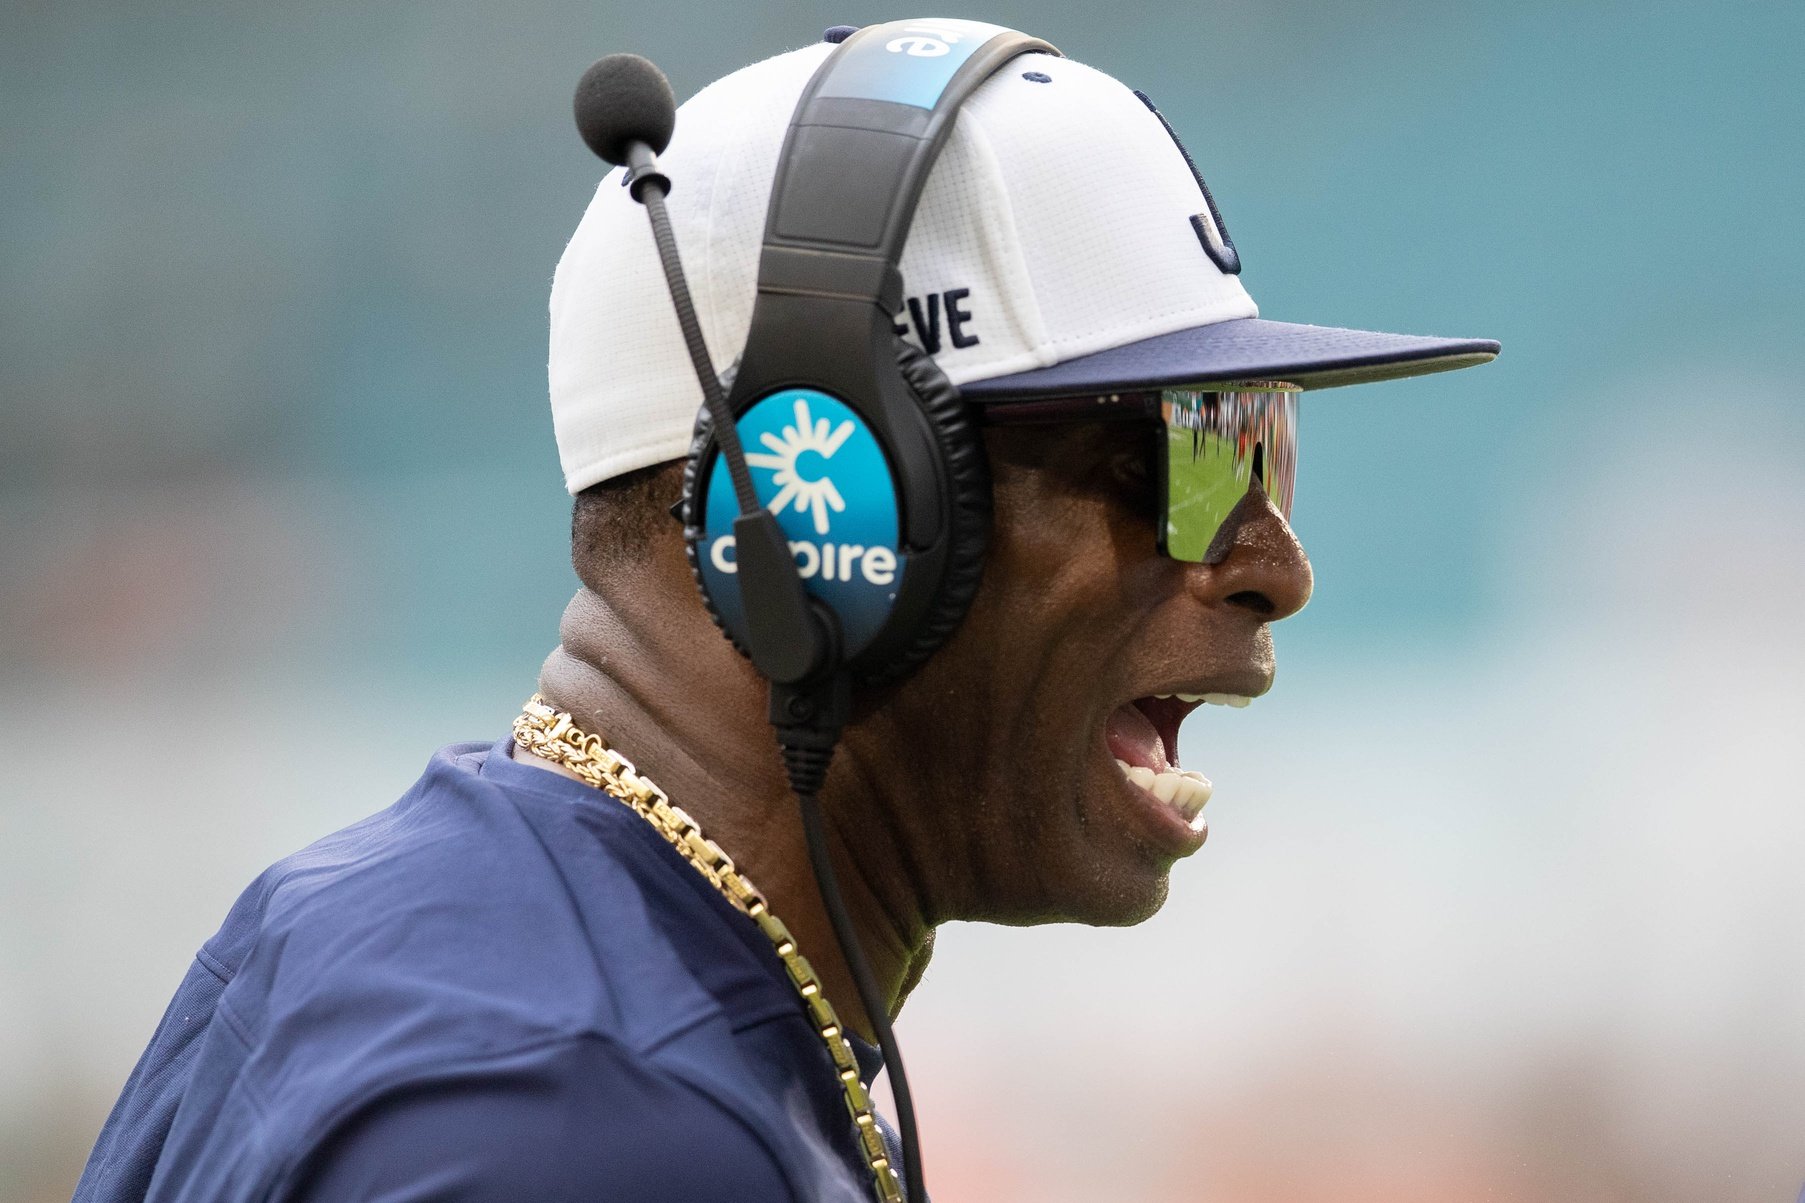 Deion Sanders wanted to play for the Bengals, but says they wouldn